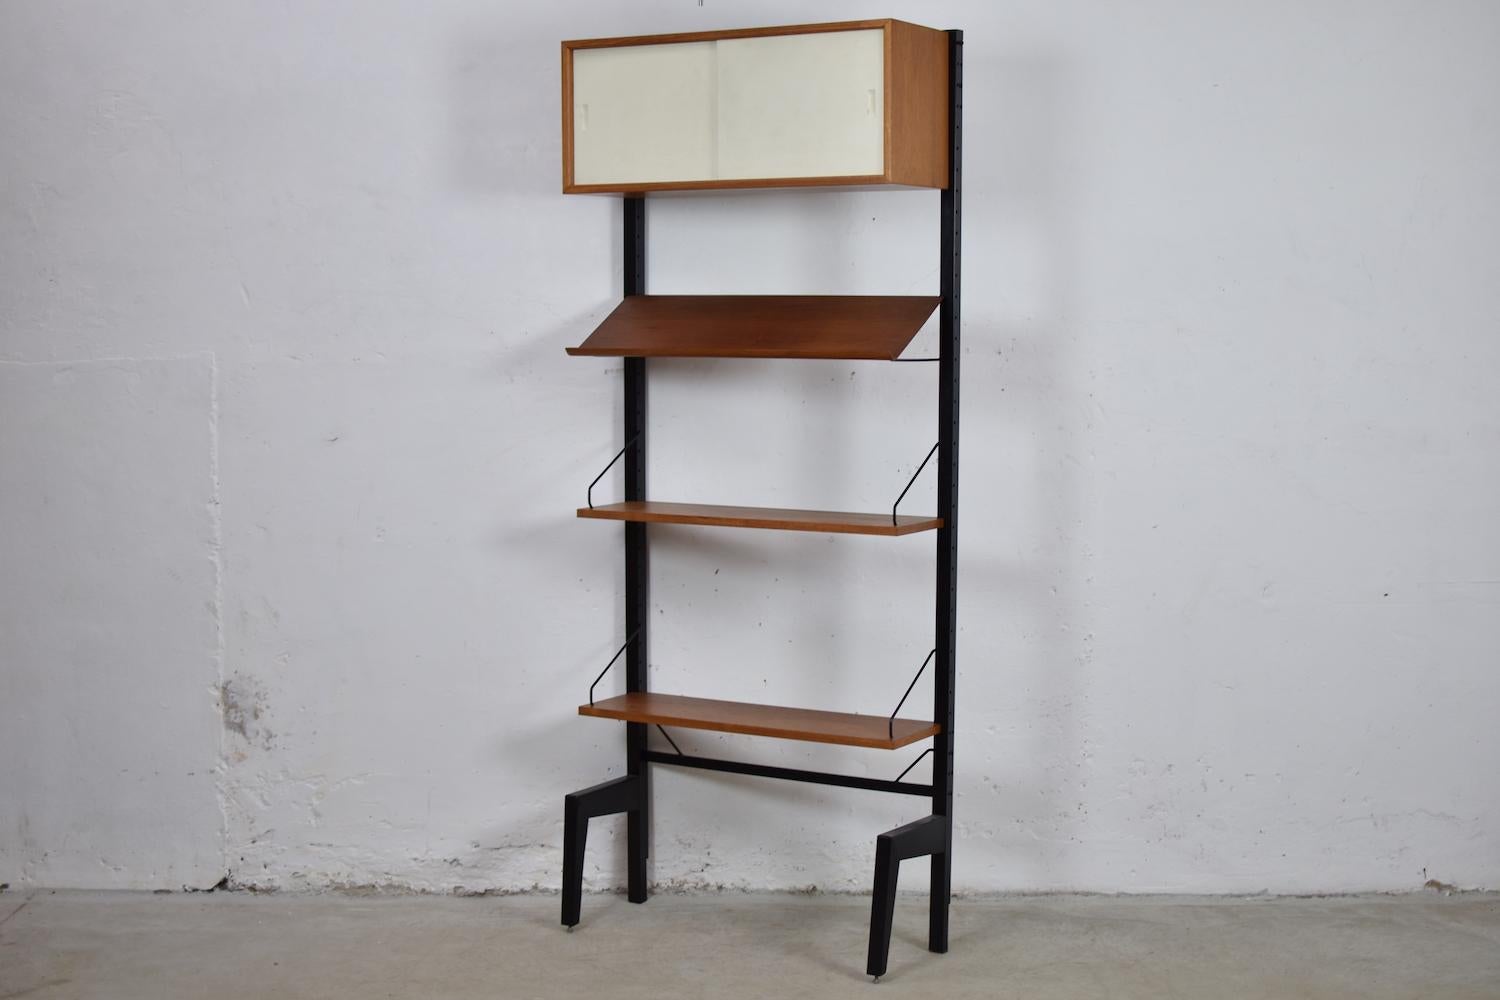 Wall unit designed by Poul Cadovius for royal systems, Denmark, 1950s. This is a flexible and expandable wall unit system so it can be arranged in multiple configurations. The shelves or case piece can be installed anywhere up and down the